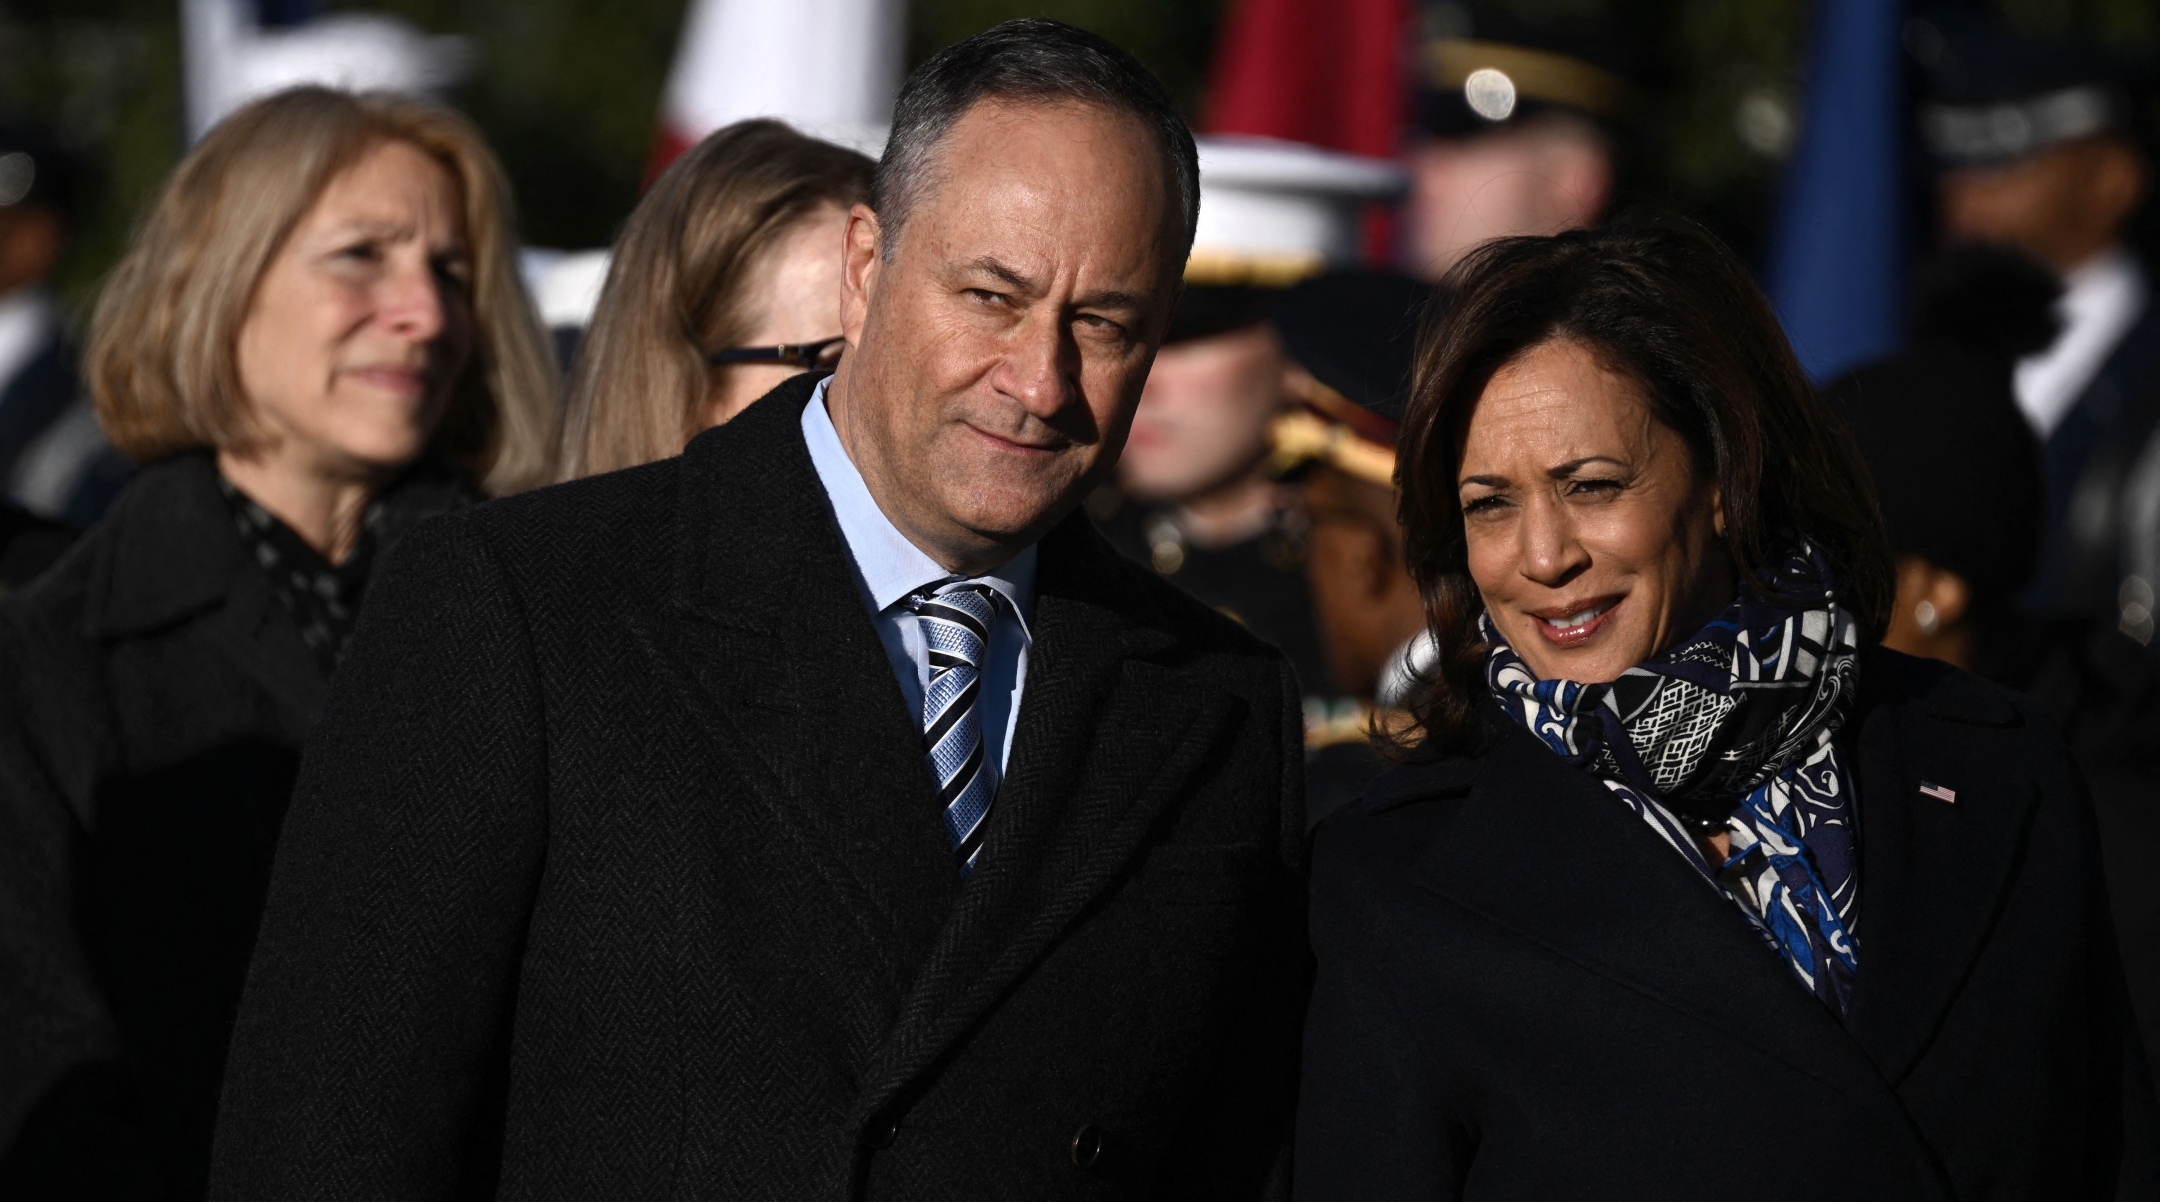 US Vice President Kamala Harris and Second Gentleman Doug Emhoff wait for the welcoming ceremony for French President Emmanuel Macron and his wife Brigitte Macron at the White House, Dec. 1, 2022. (Brendan Smialowski/AFP via Getty Images)